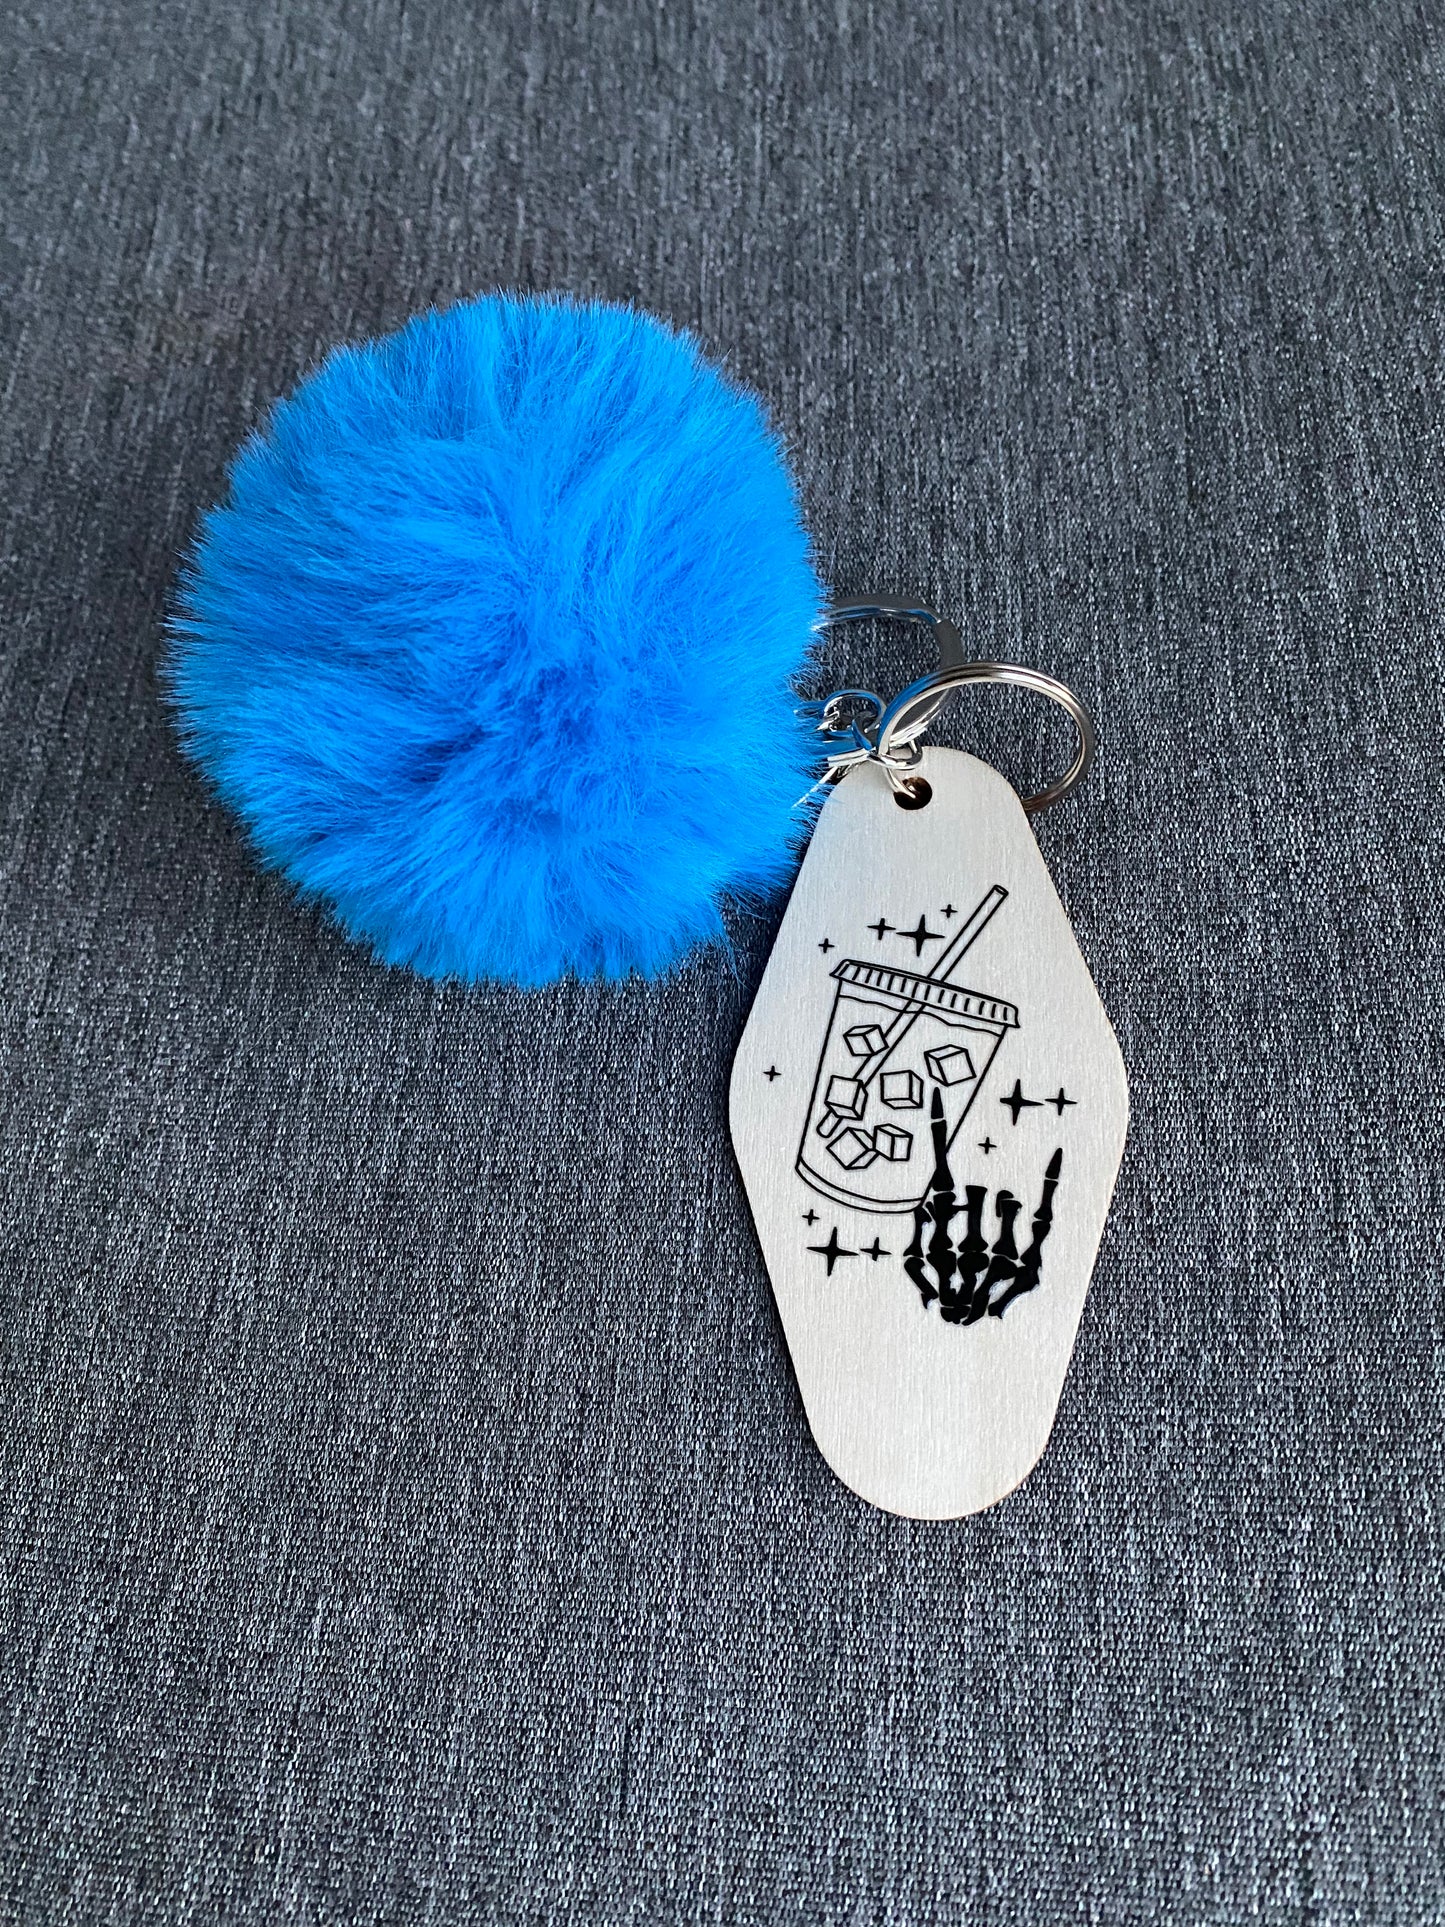 Iced Coffee + Skeleton Hand Vintage Motel Keychain with Fluff Ball